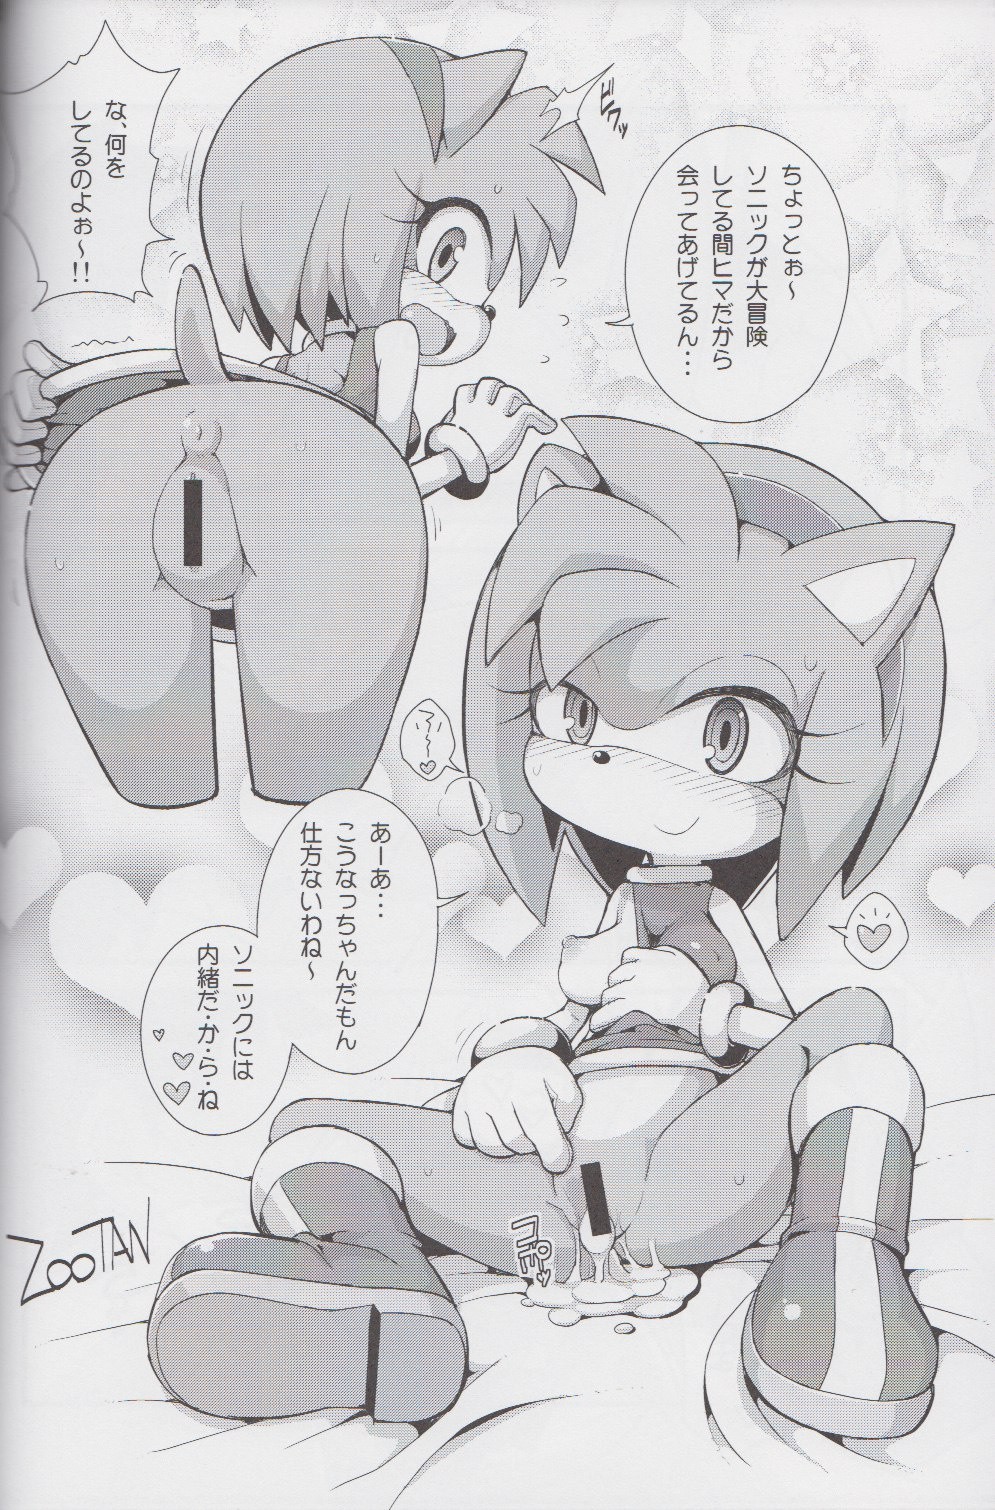 Rouge The girl next game hentai manga picture 41